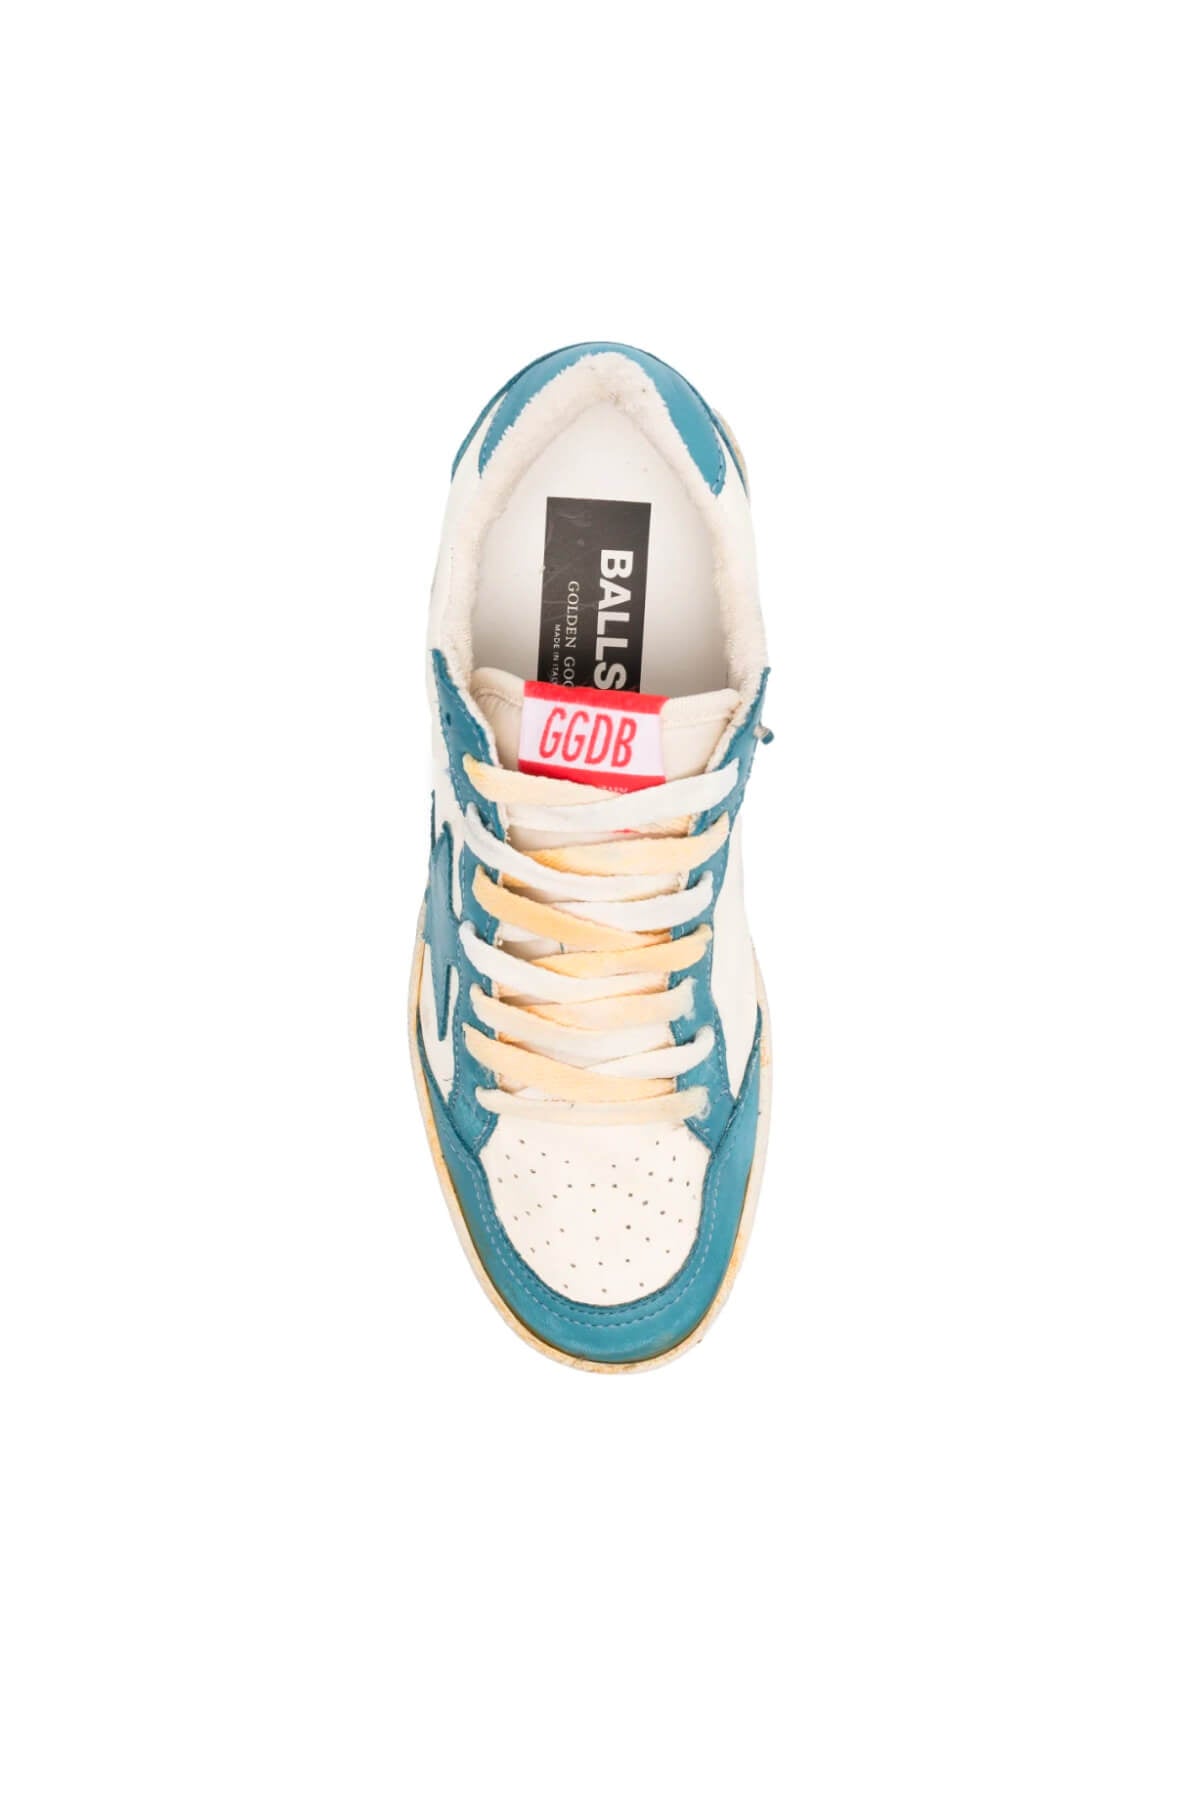 Golden Goose Ball Star Sneakers - Petroleum/ Dirty White